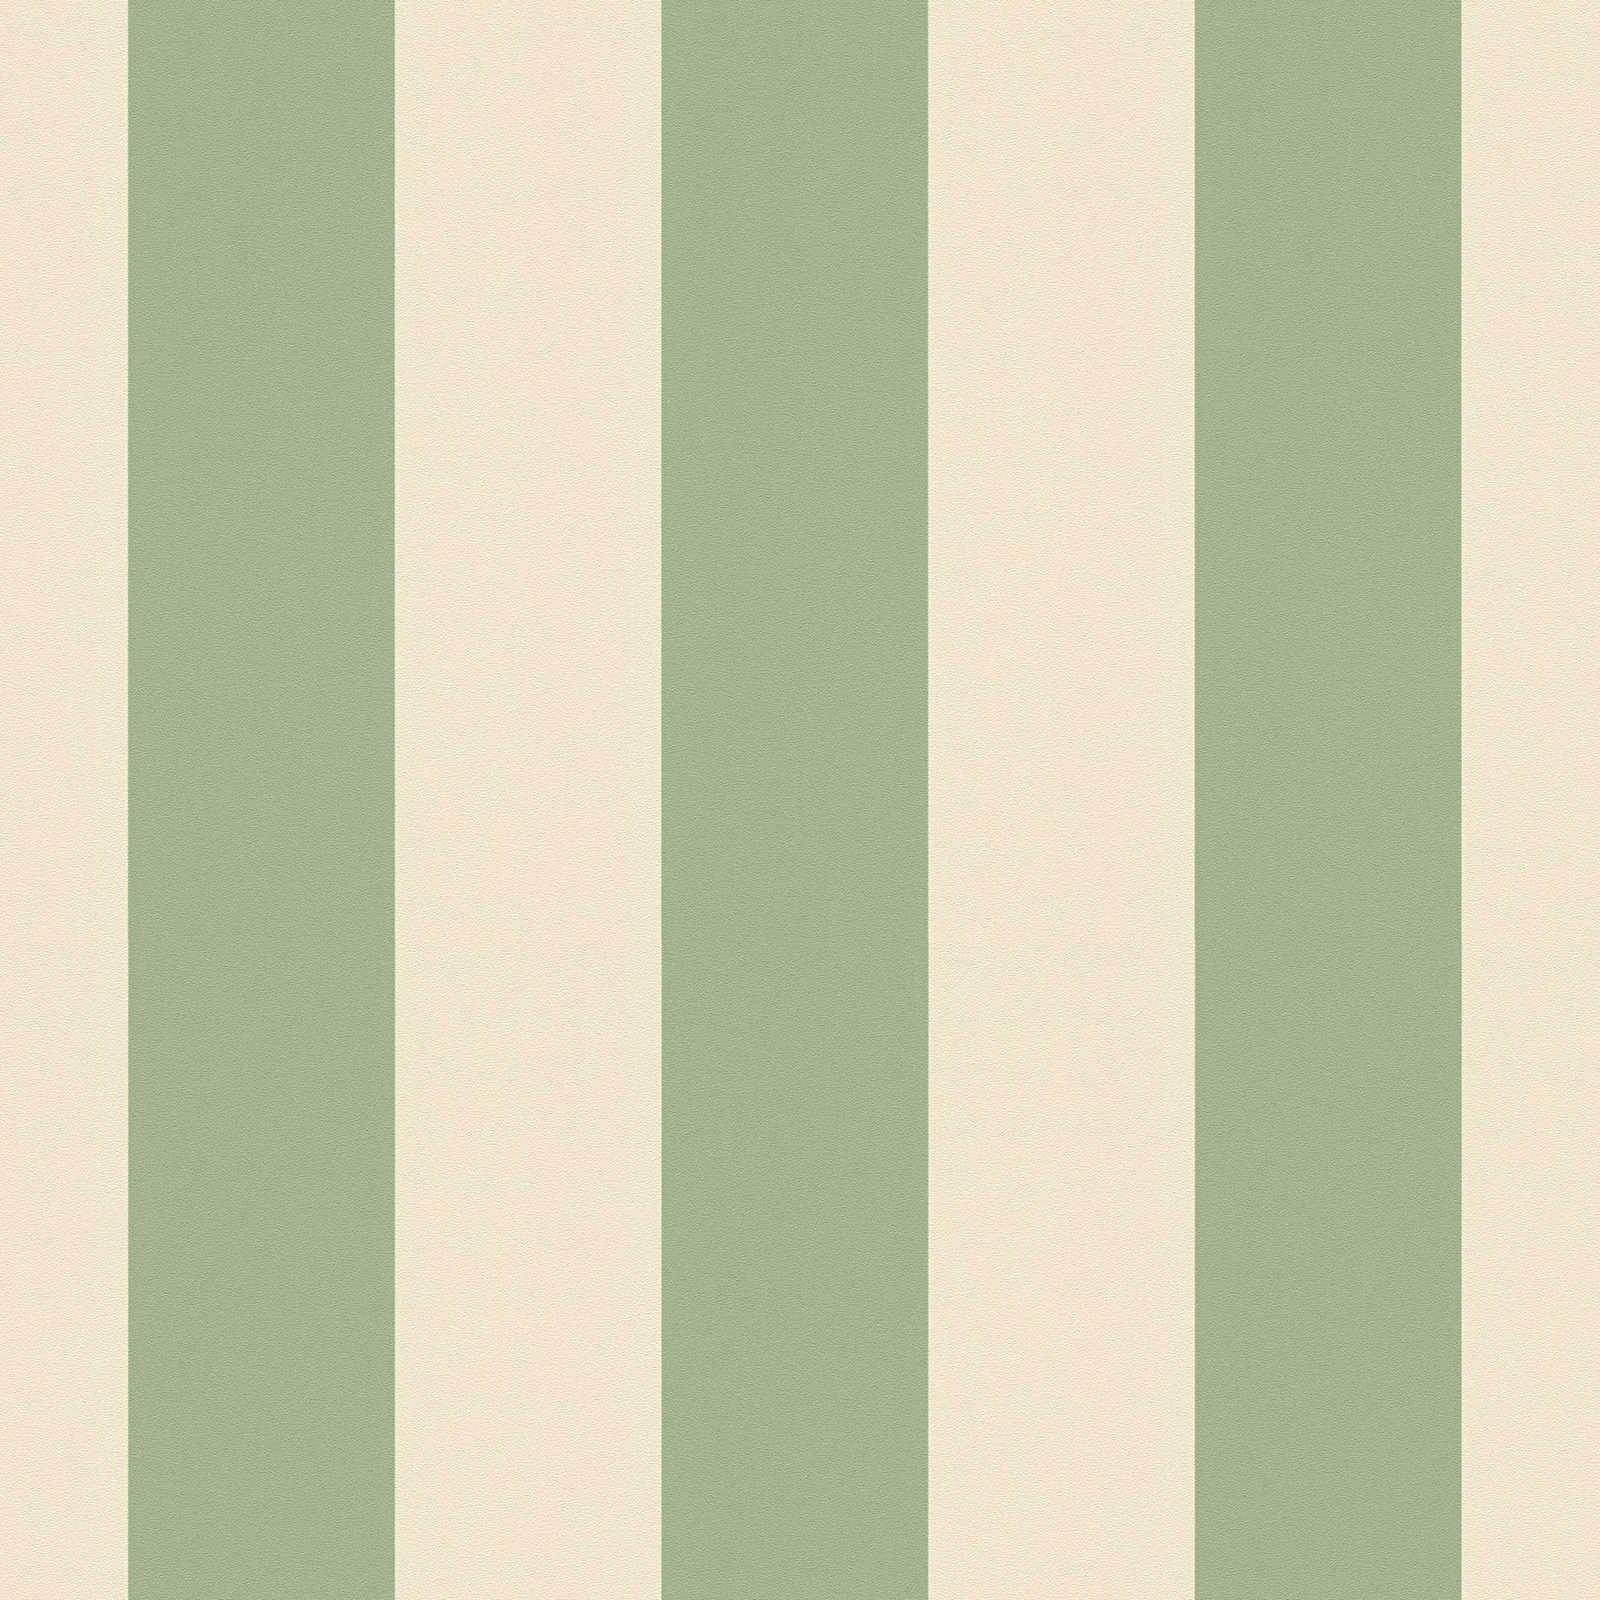             Non-woven wallpaper with block stripes and light structure - beige, green
        